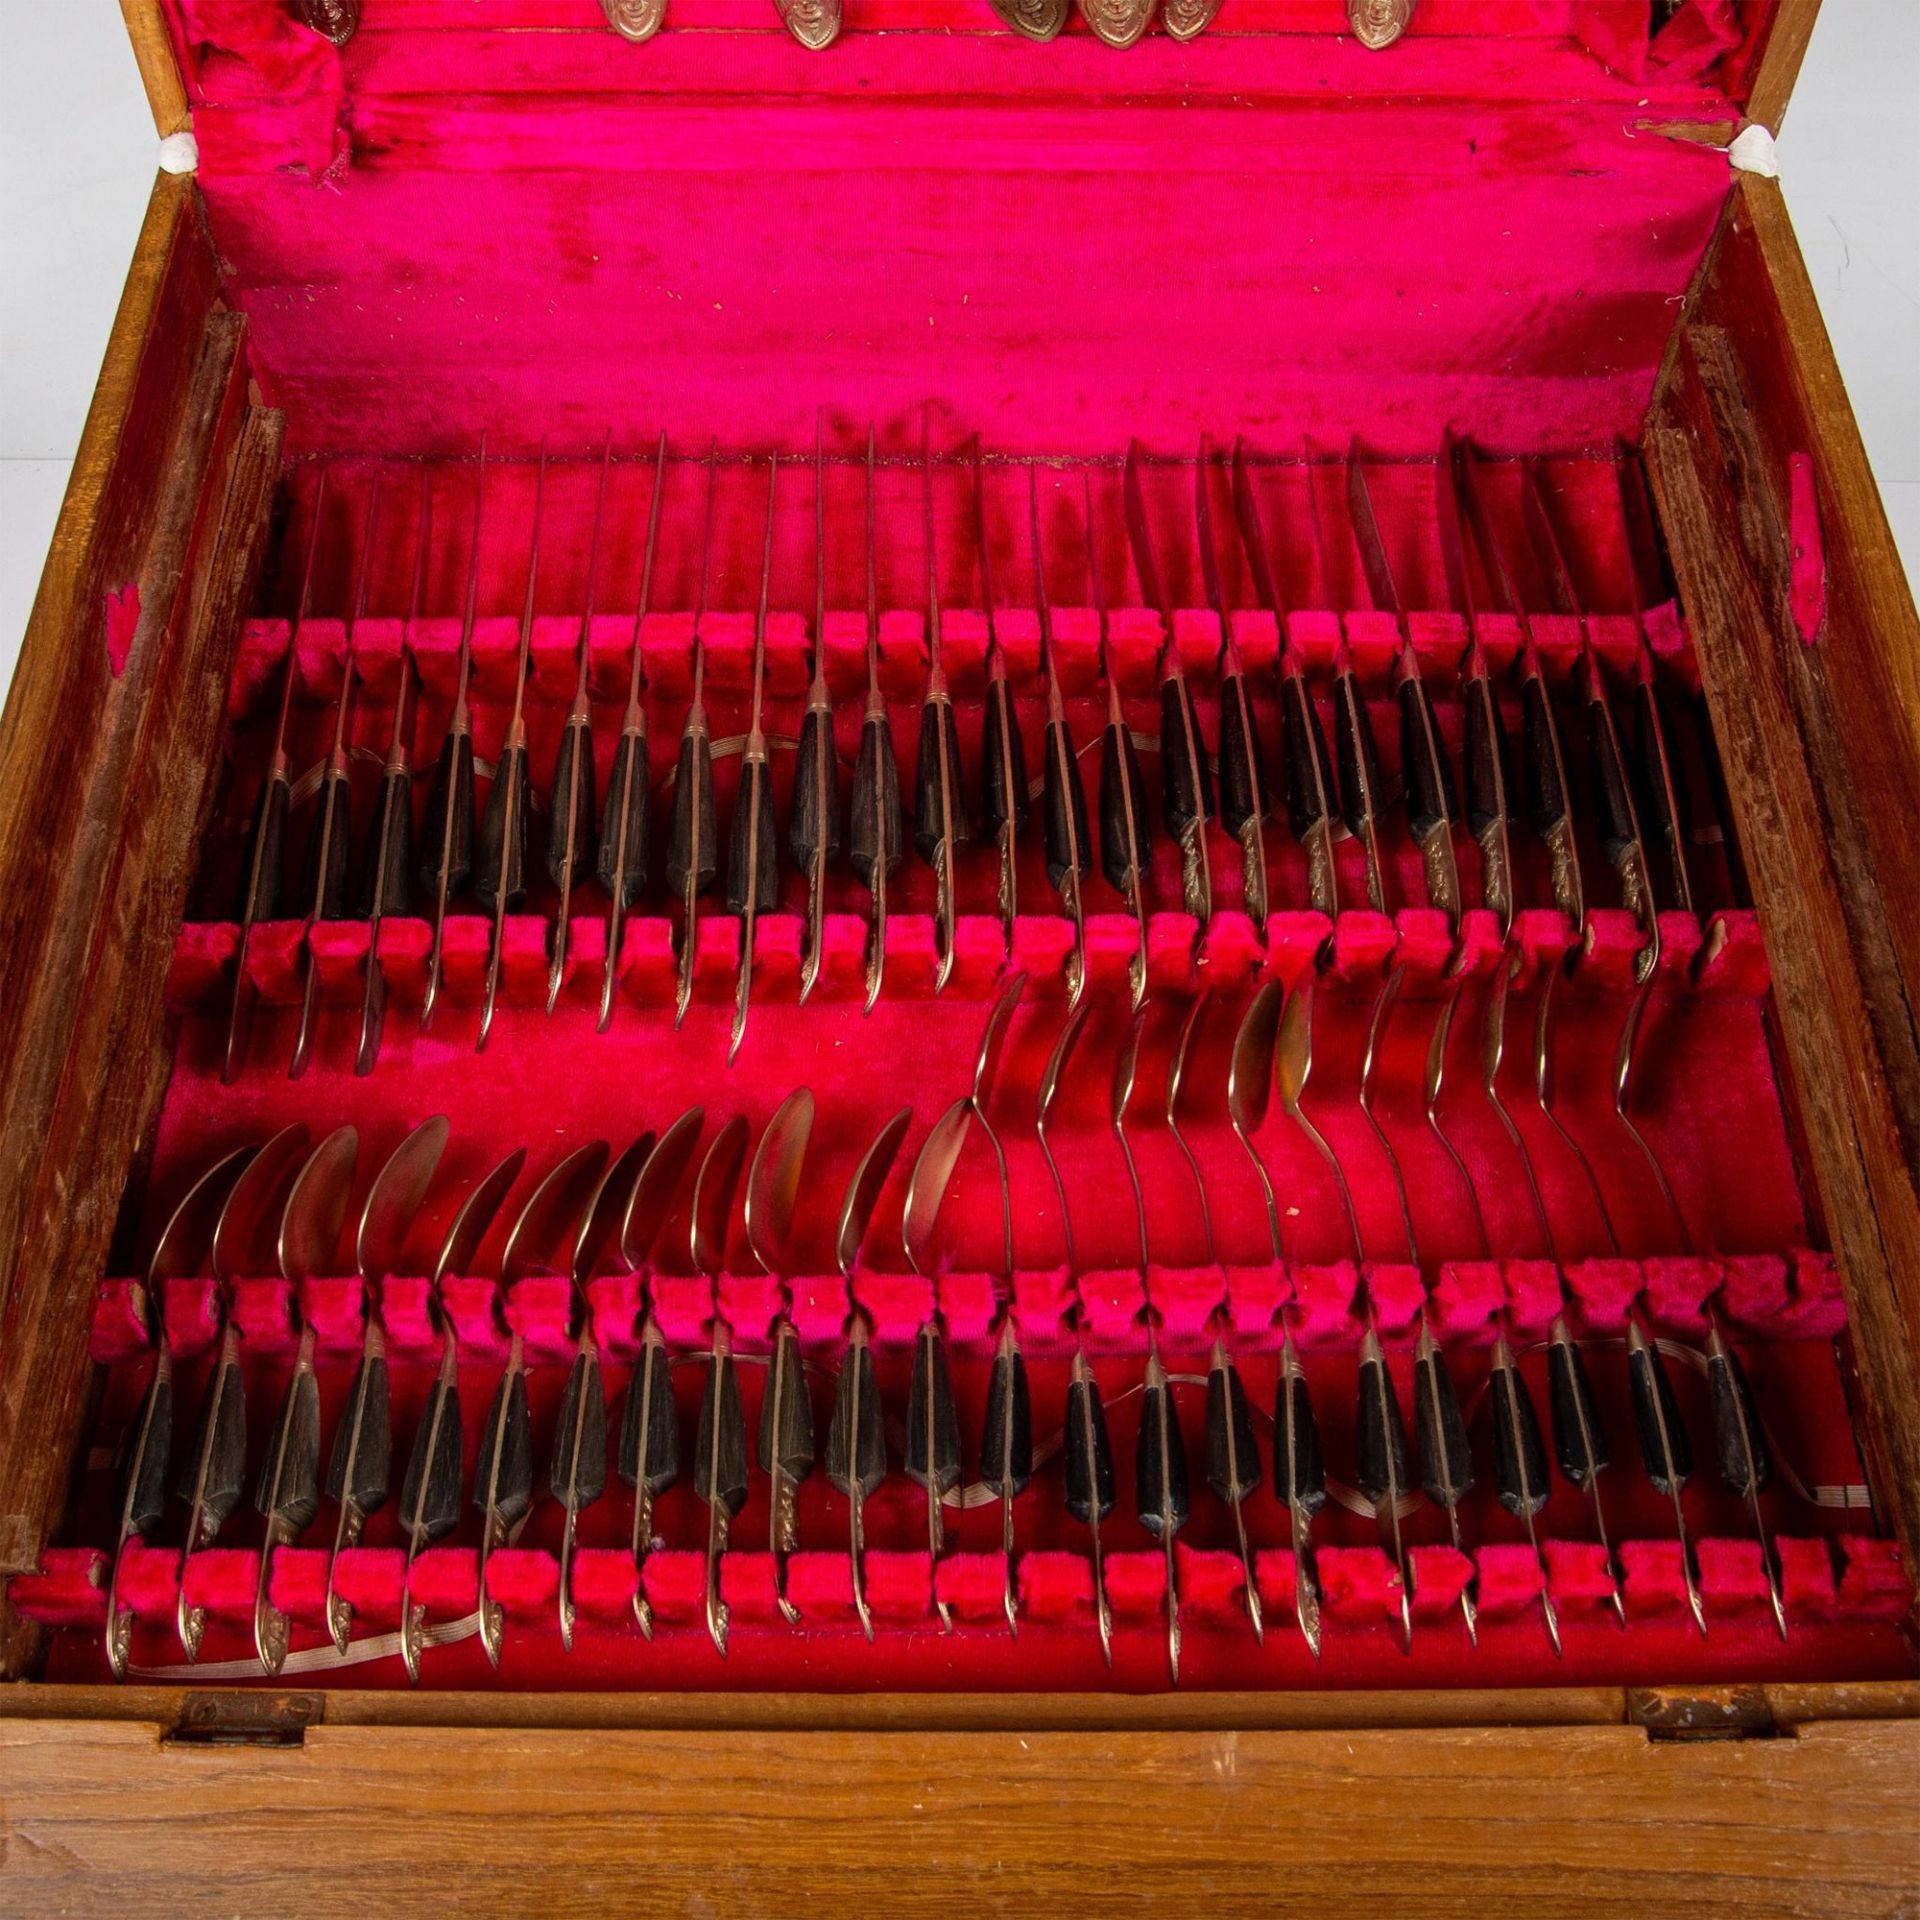 150pc Siam Bronze and Rosewood Flatware - Image 7 of 10